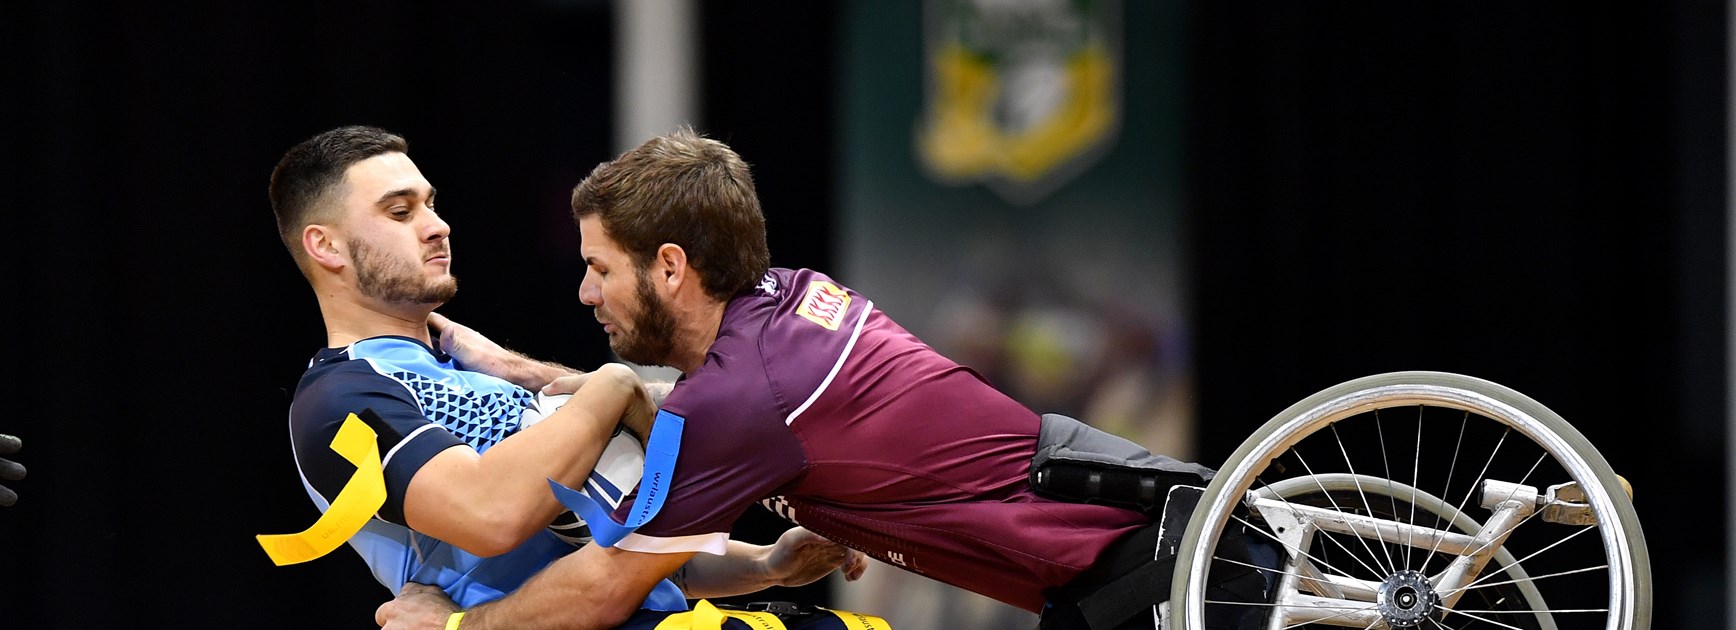 Action from the Wheelchair Rugby League State of Origin day at Sydney Olympic Park.